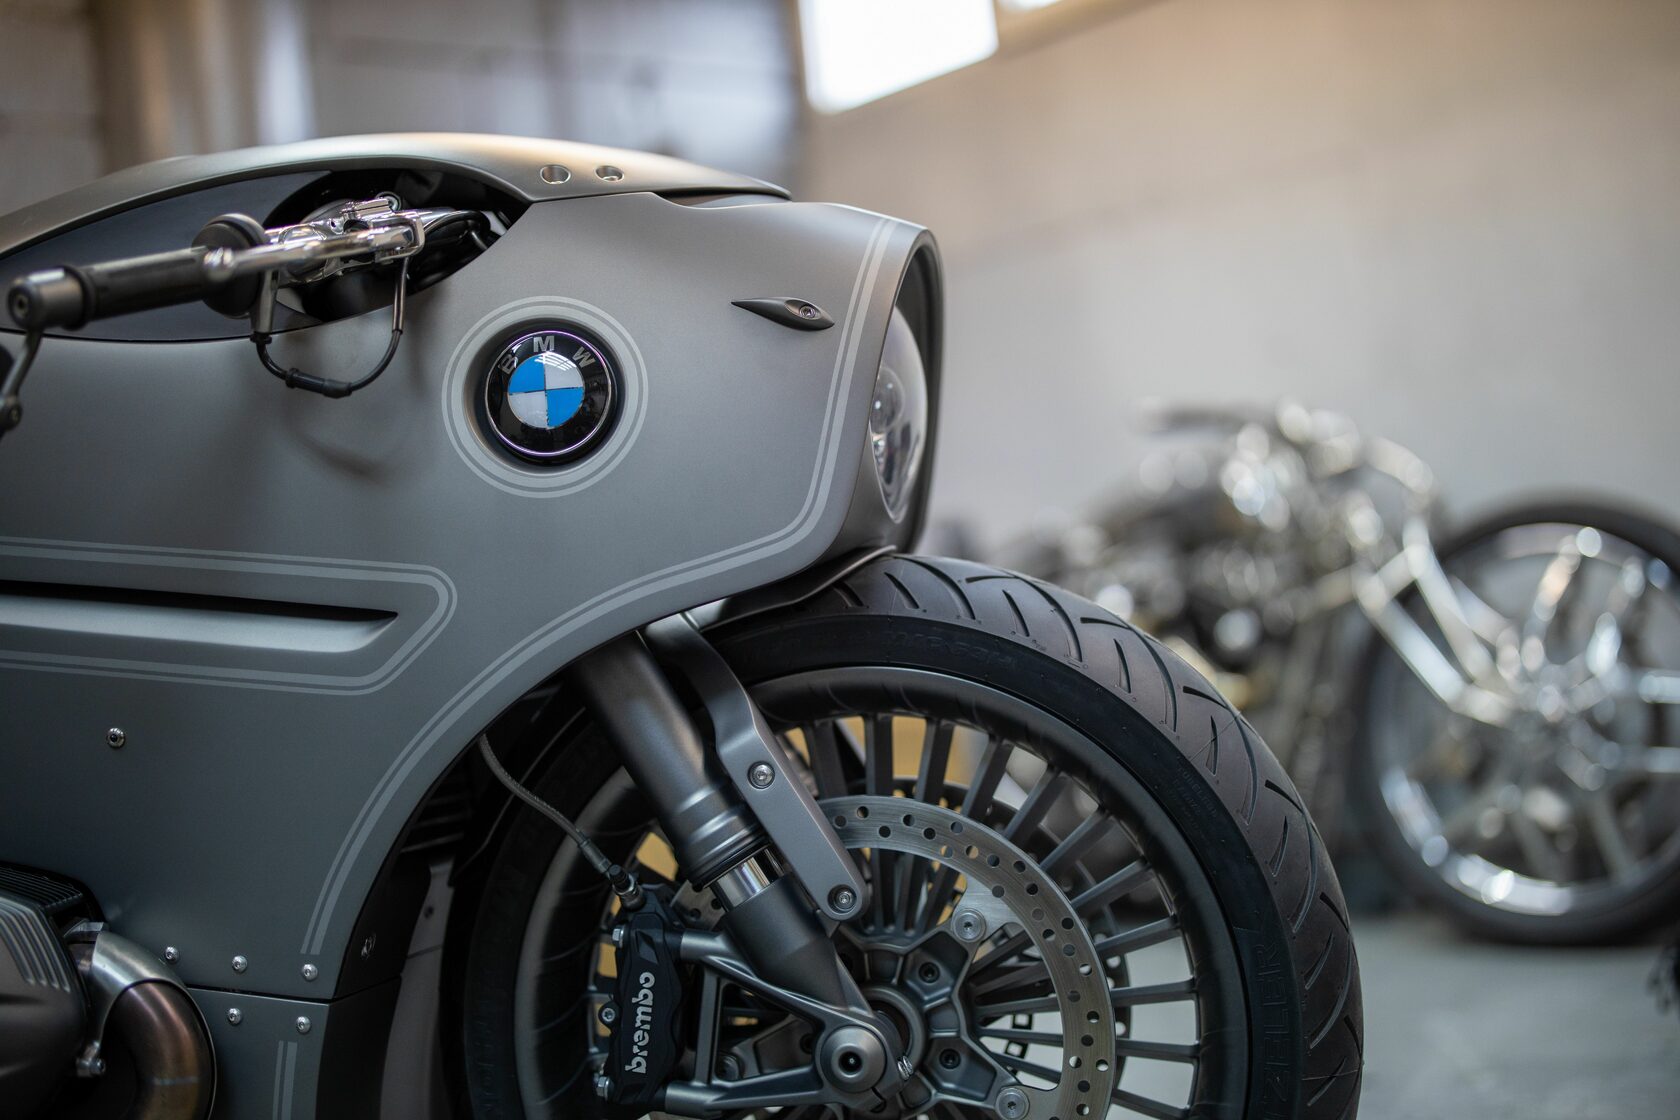 Customizing a BMW R NINET 801 motorcycle | Zillers Garage 